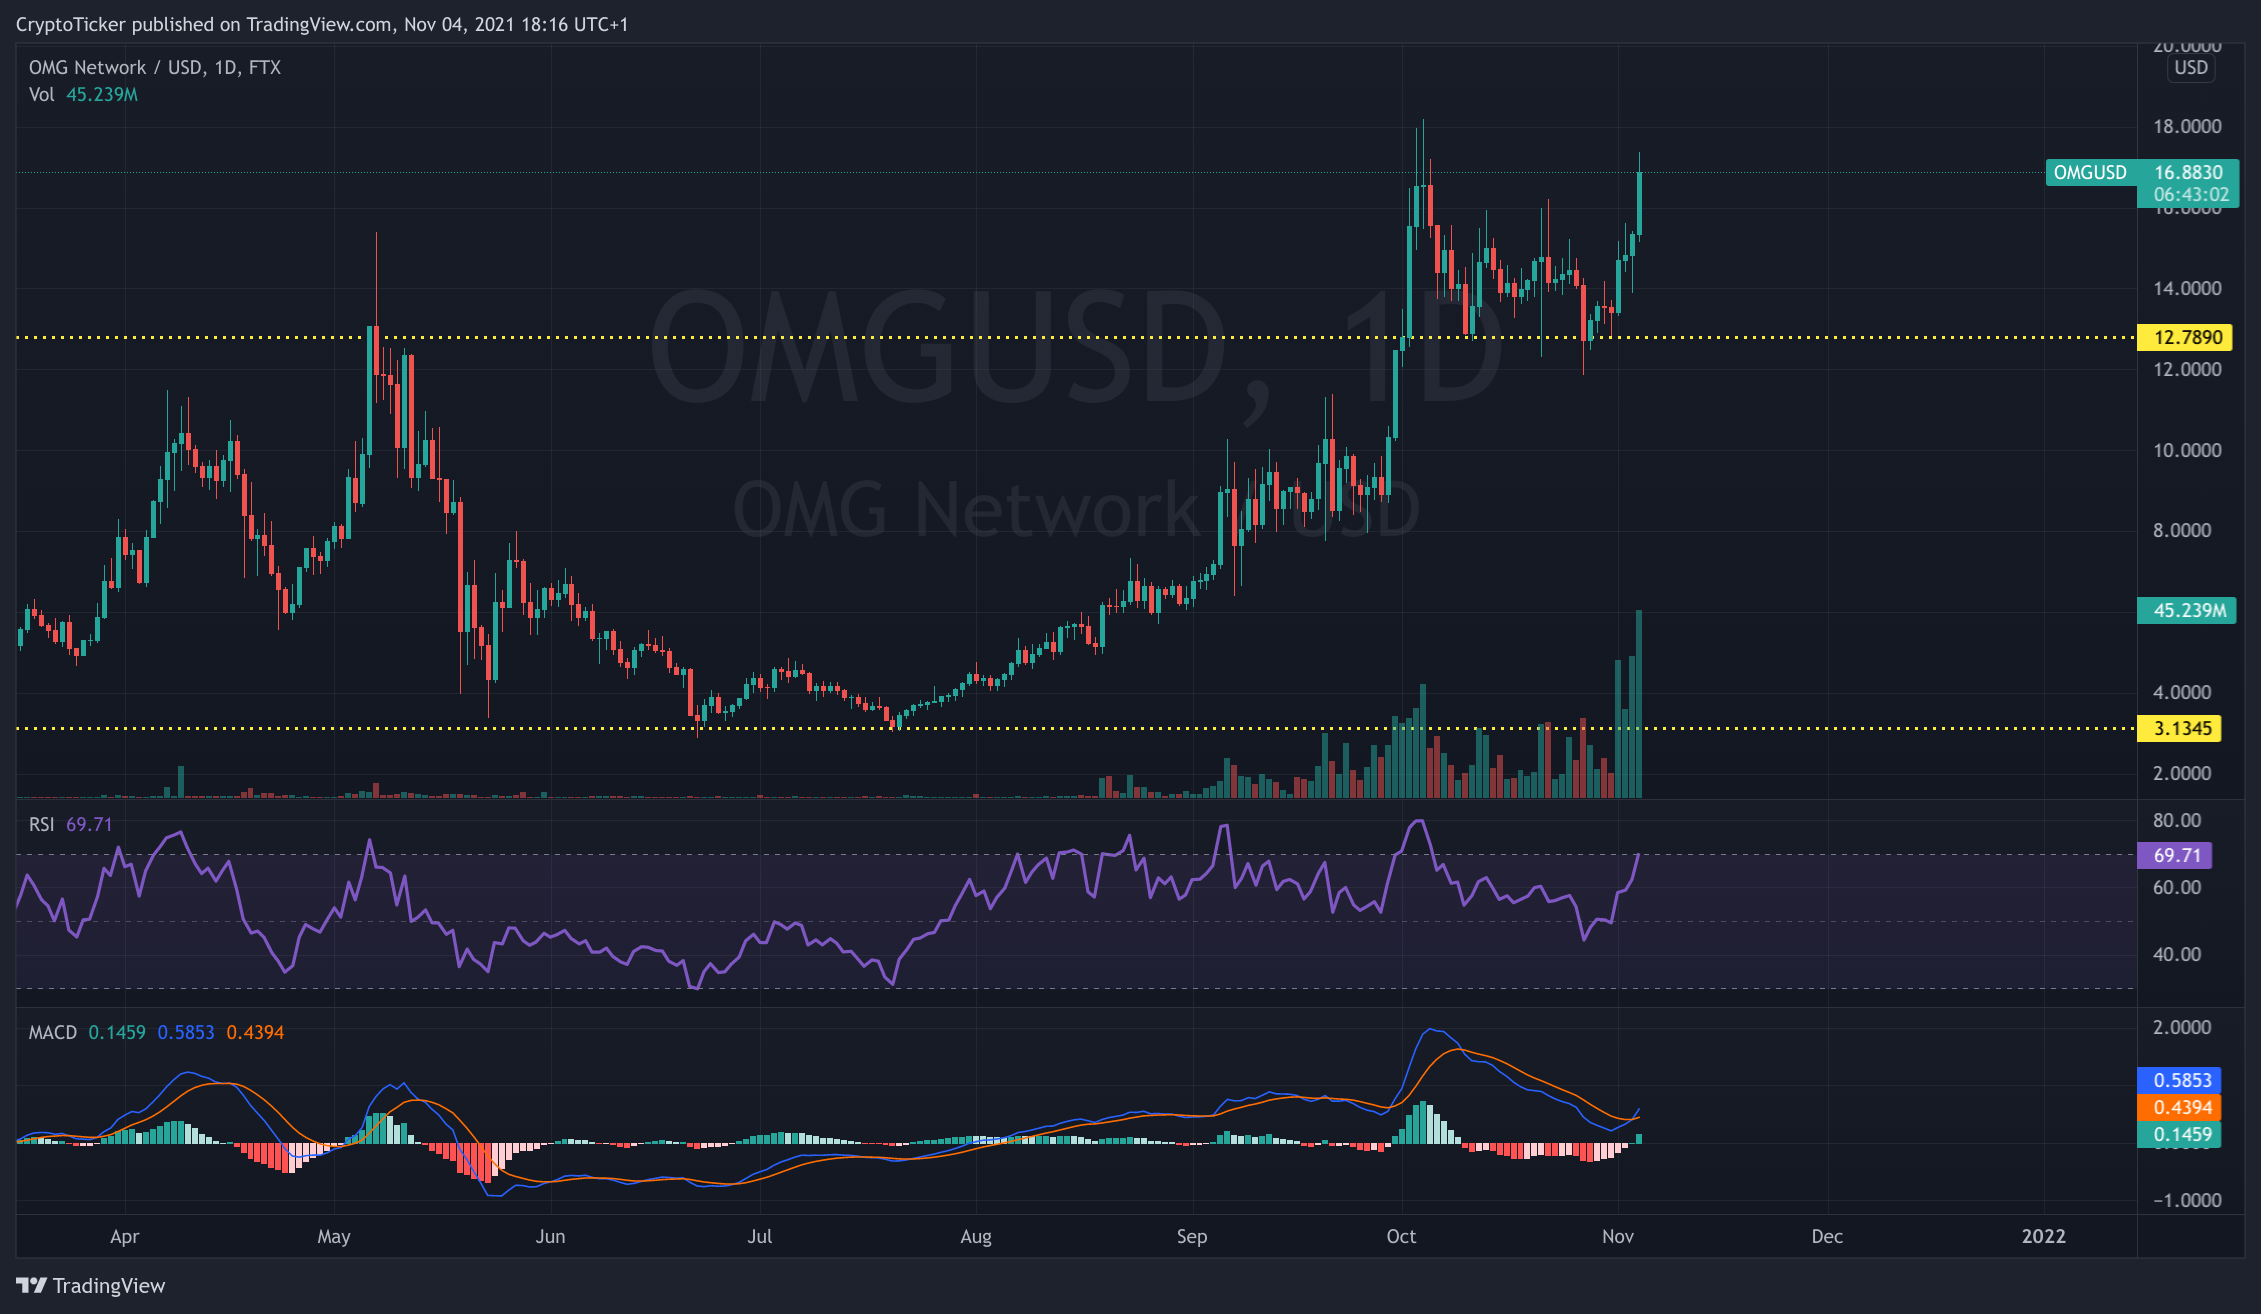 Crypto up - OMG/USD 1-day chart showing the rise of the OMG Token